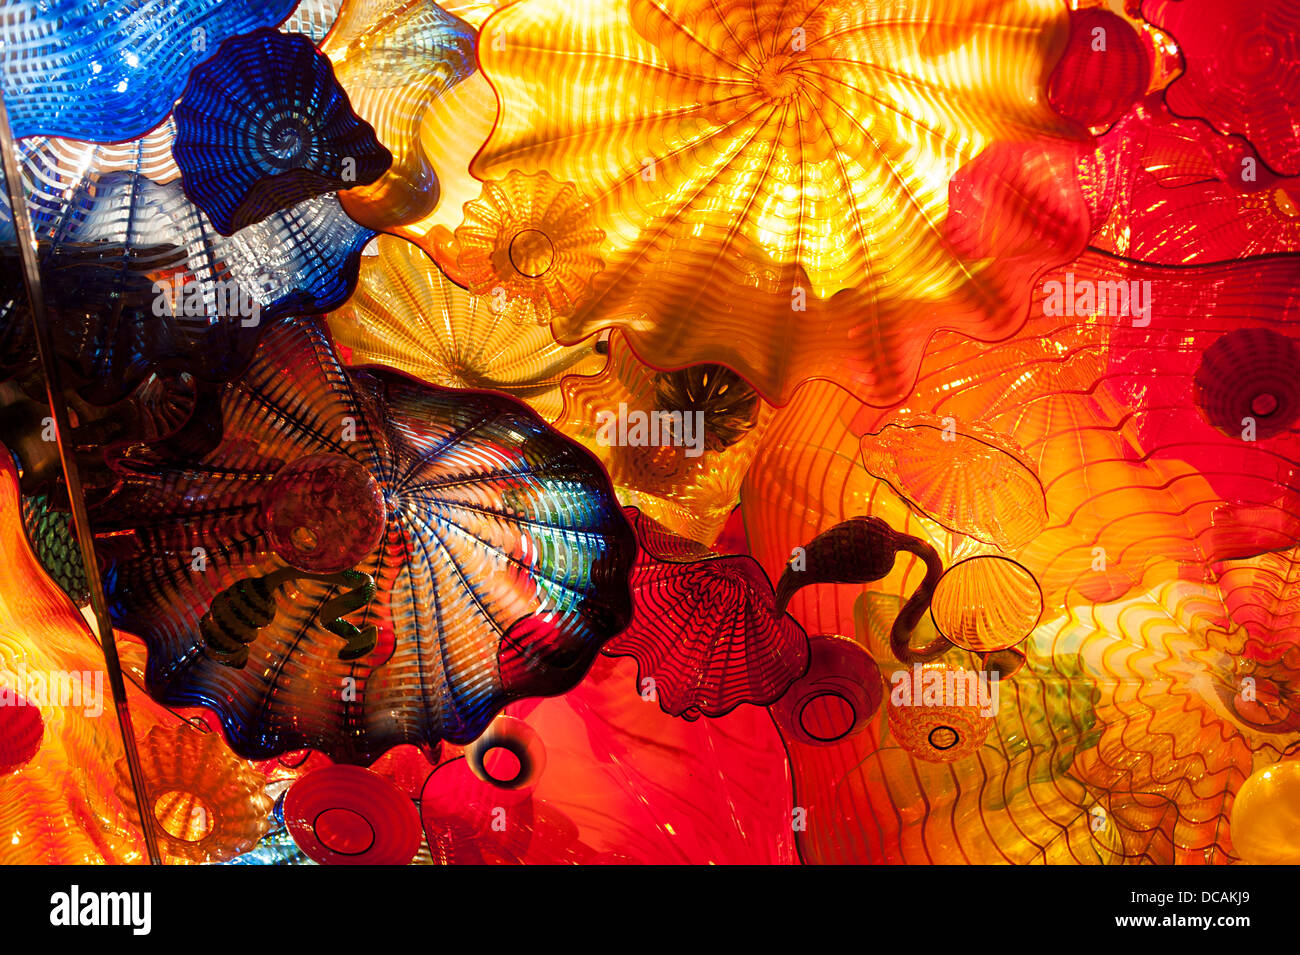 American glass sculptor Dale Chihuly exhibits his brilliant glass installations in the Montreal Museum of Fine Arts. Stock Photo